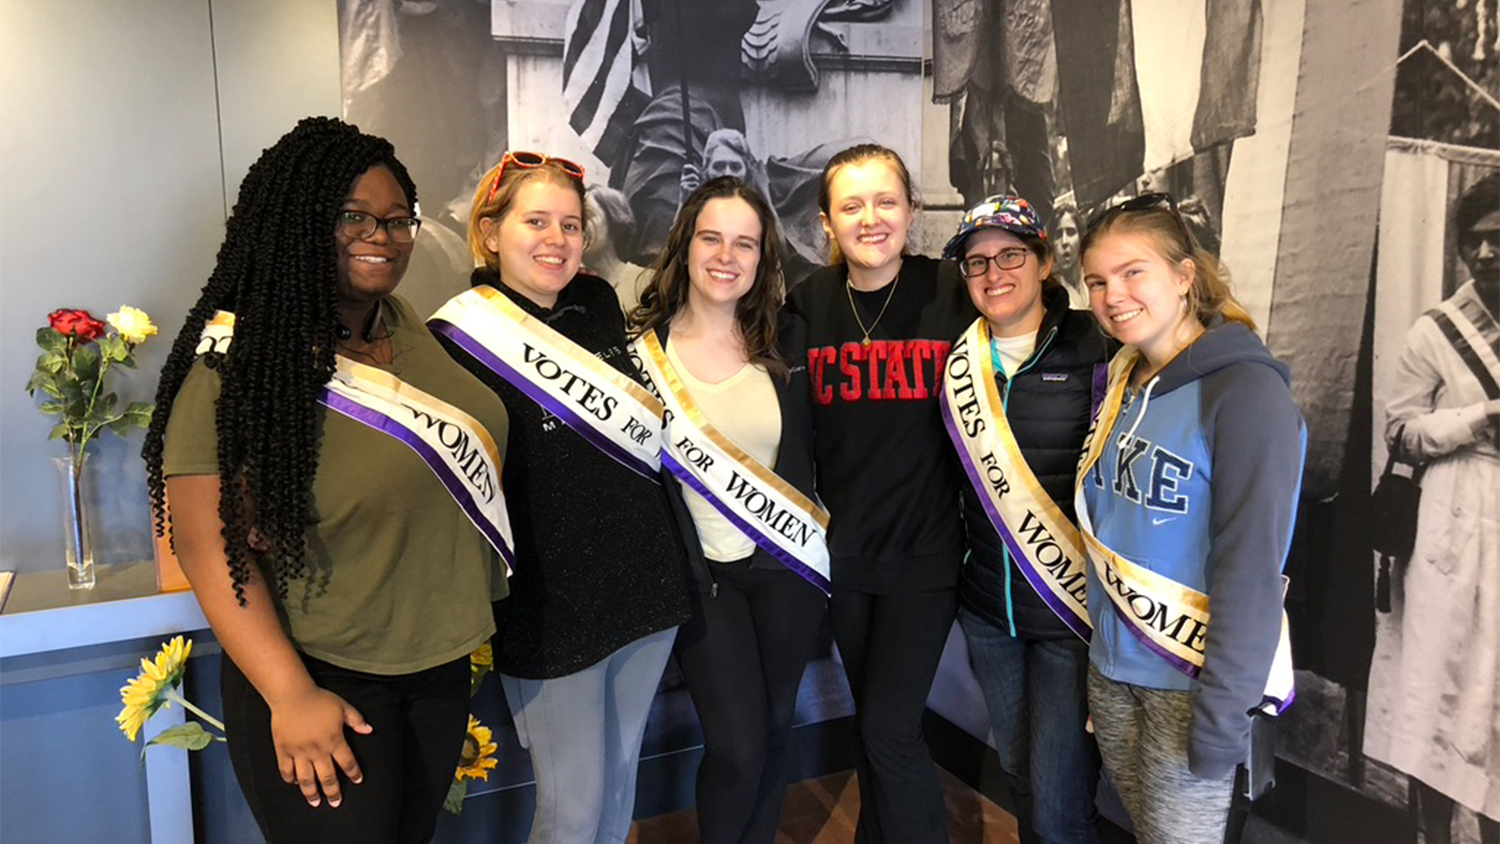 A group of five students from the Women of Welch Village wearing sashes that say "votes for women."